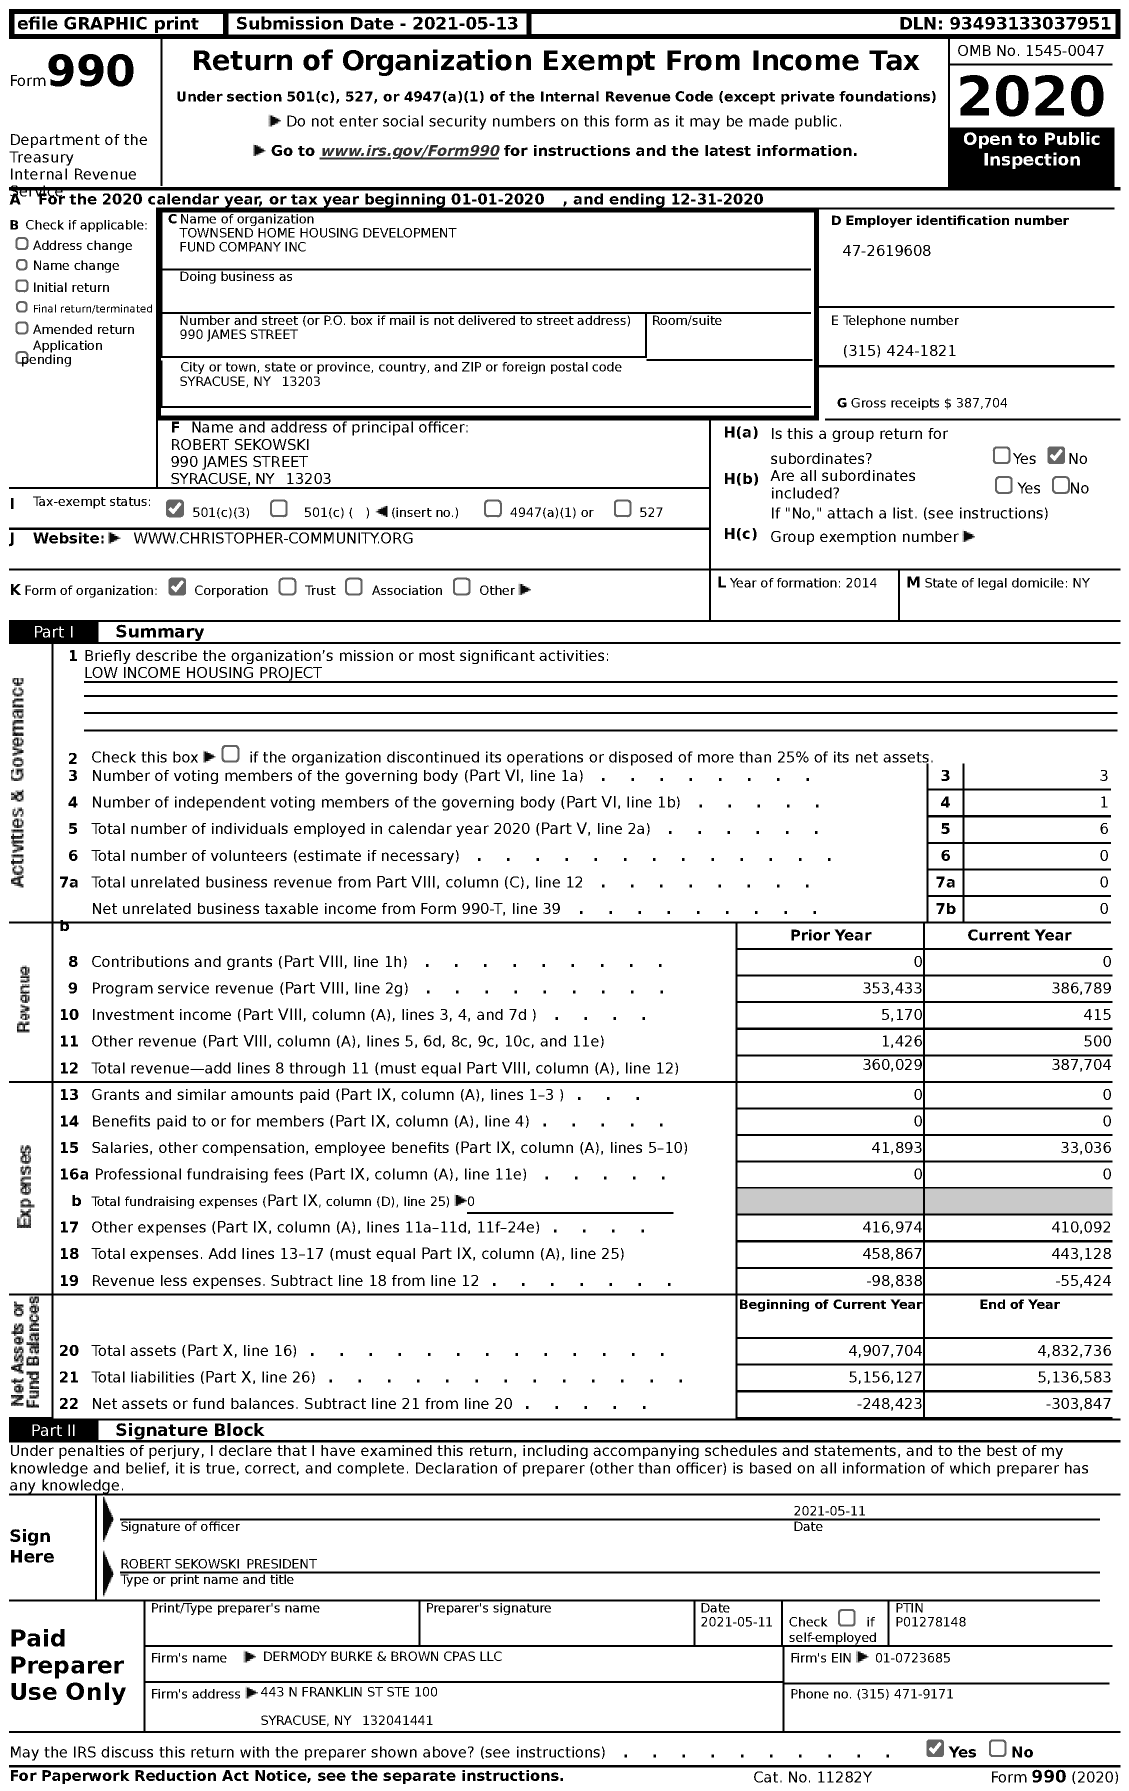 Image of first page of 2020 Form 990 for Townsend Home Housing Development Fund Company